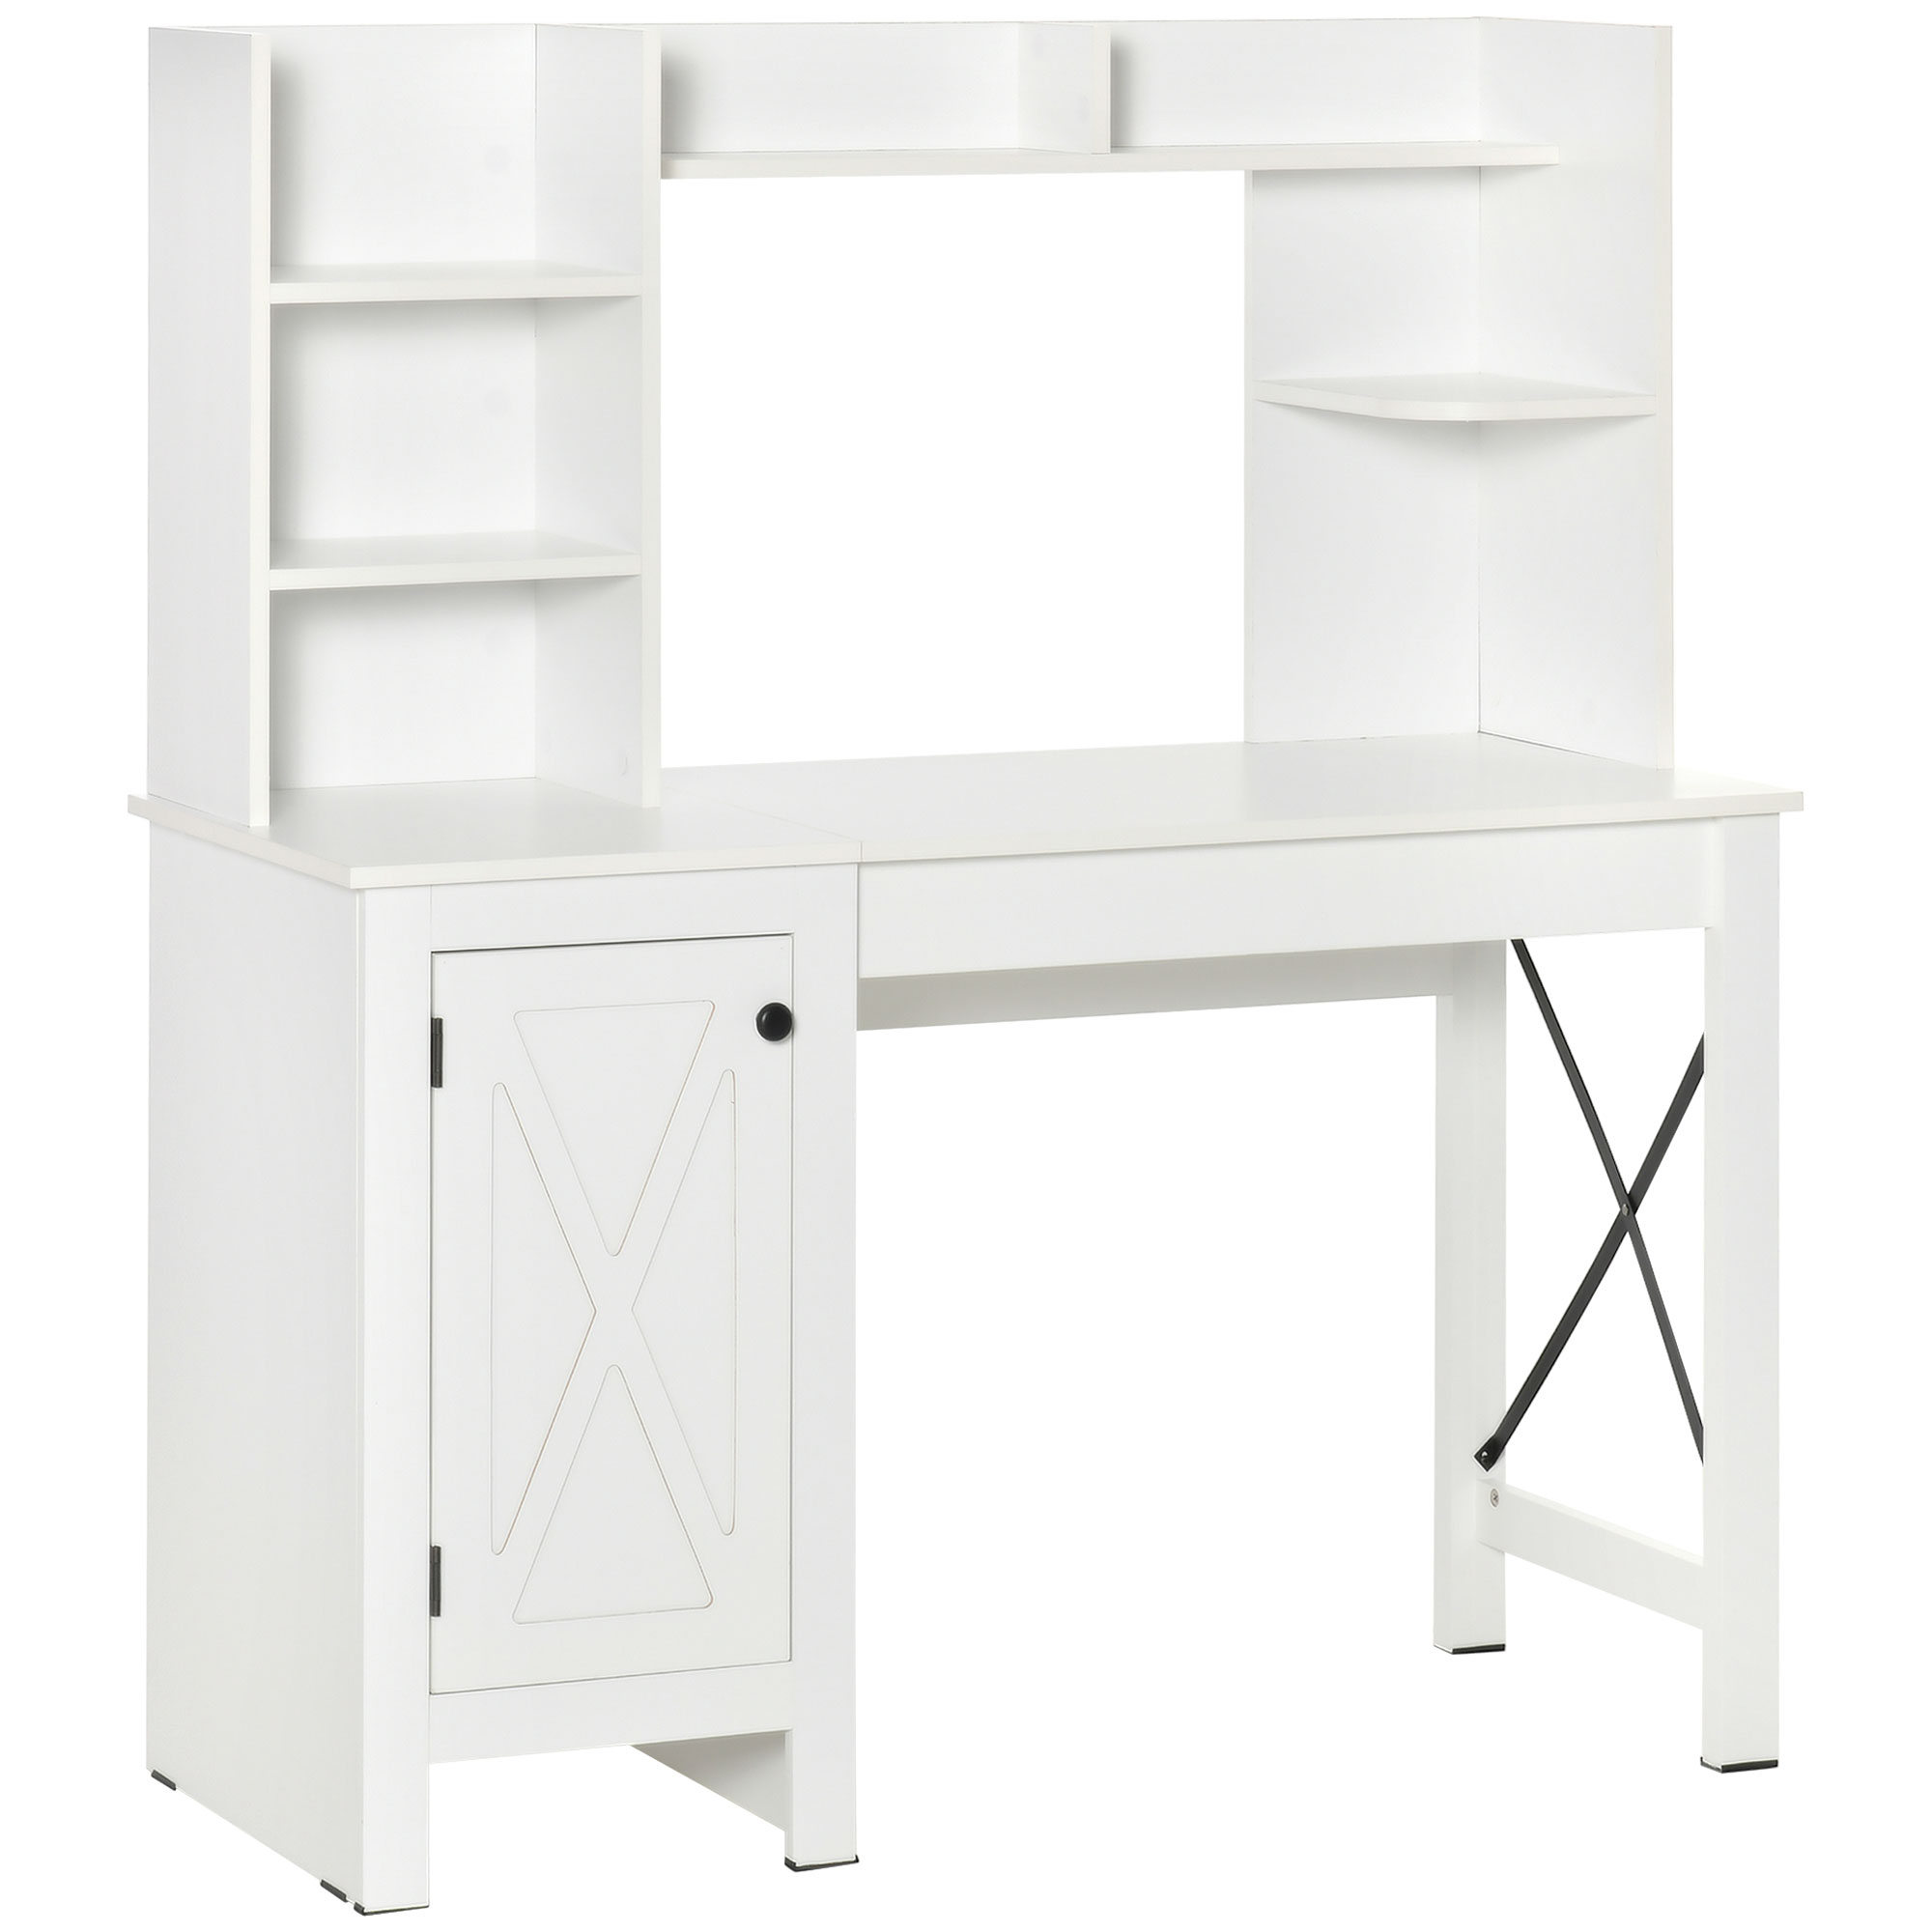 Homcom Farmhouse Computer Desk with Hutch and Cabinet, Home Office Desk with Storage, White - image 1 of 9